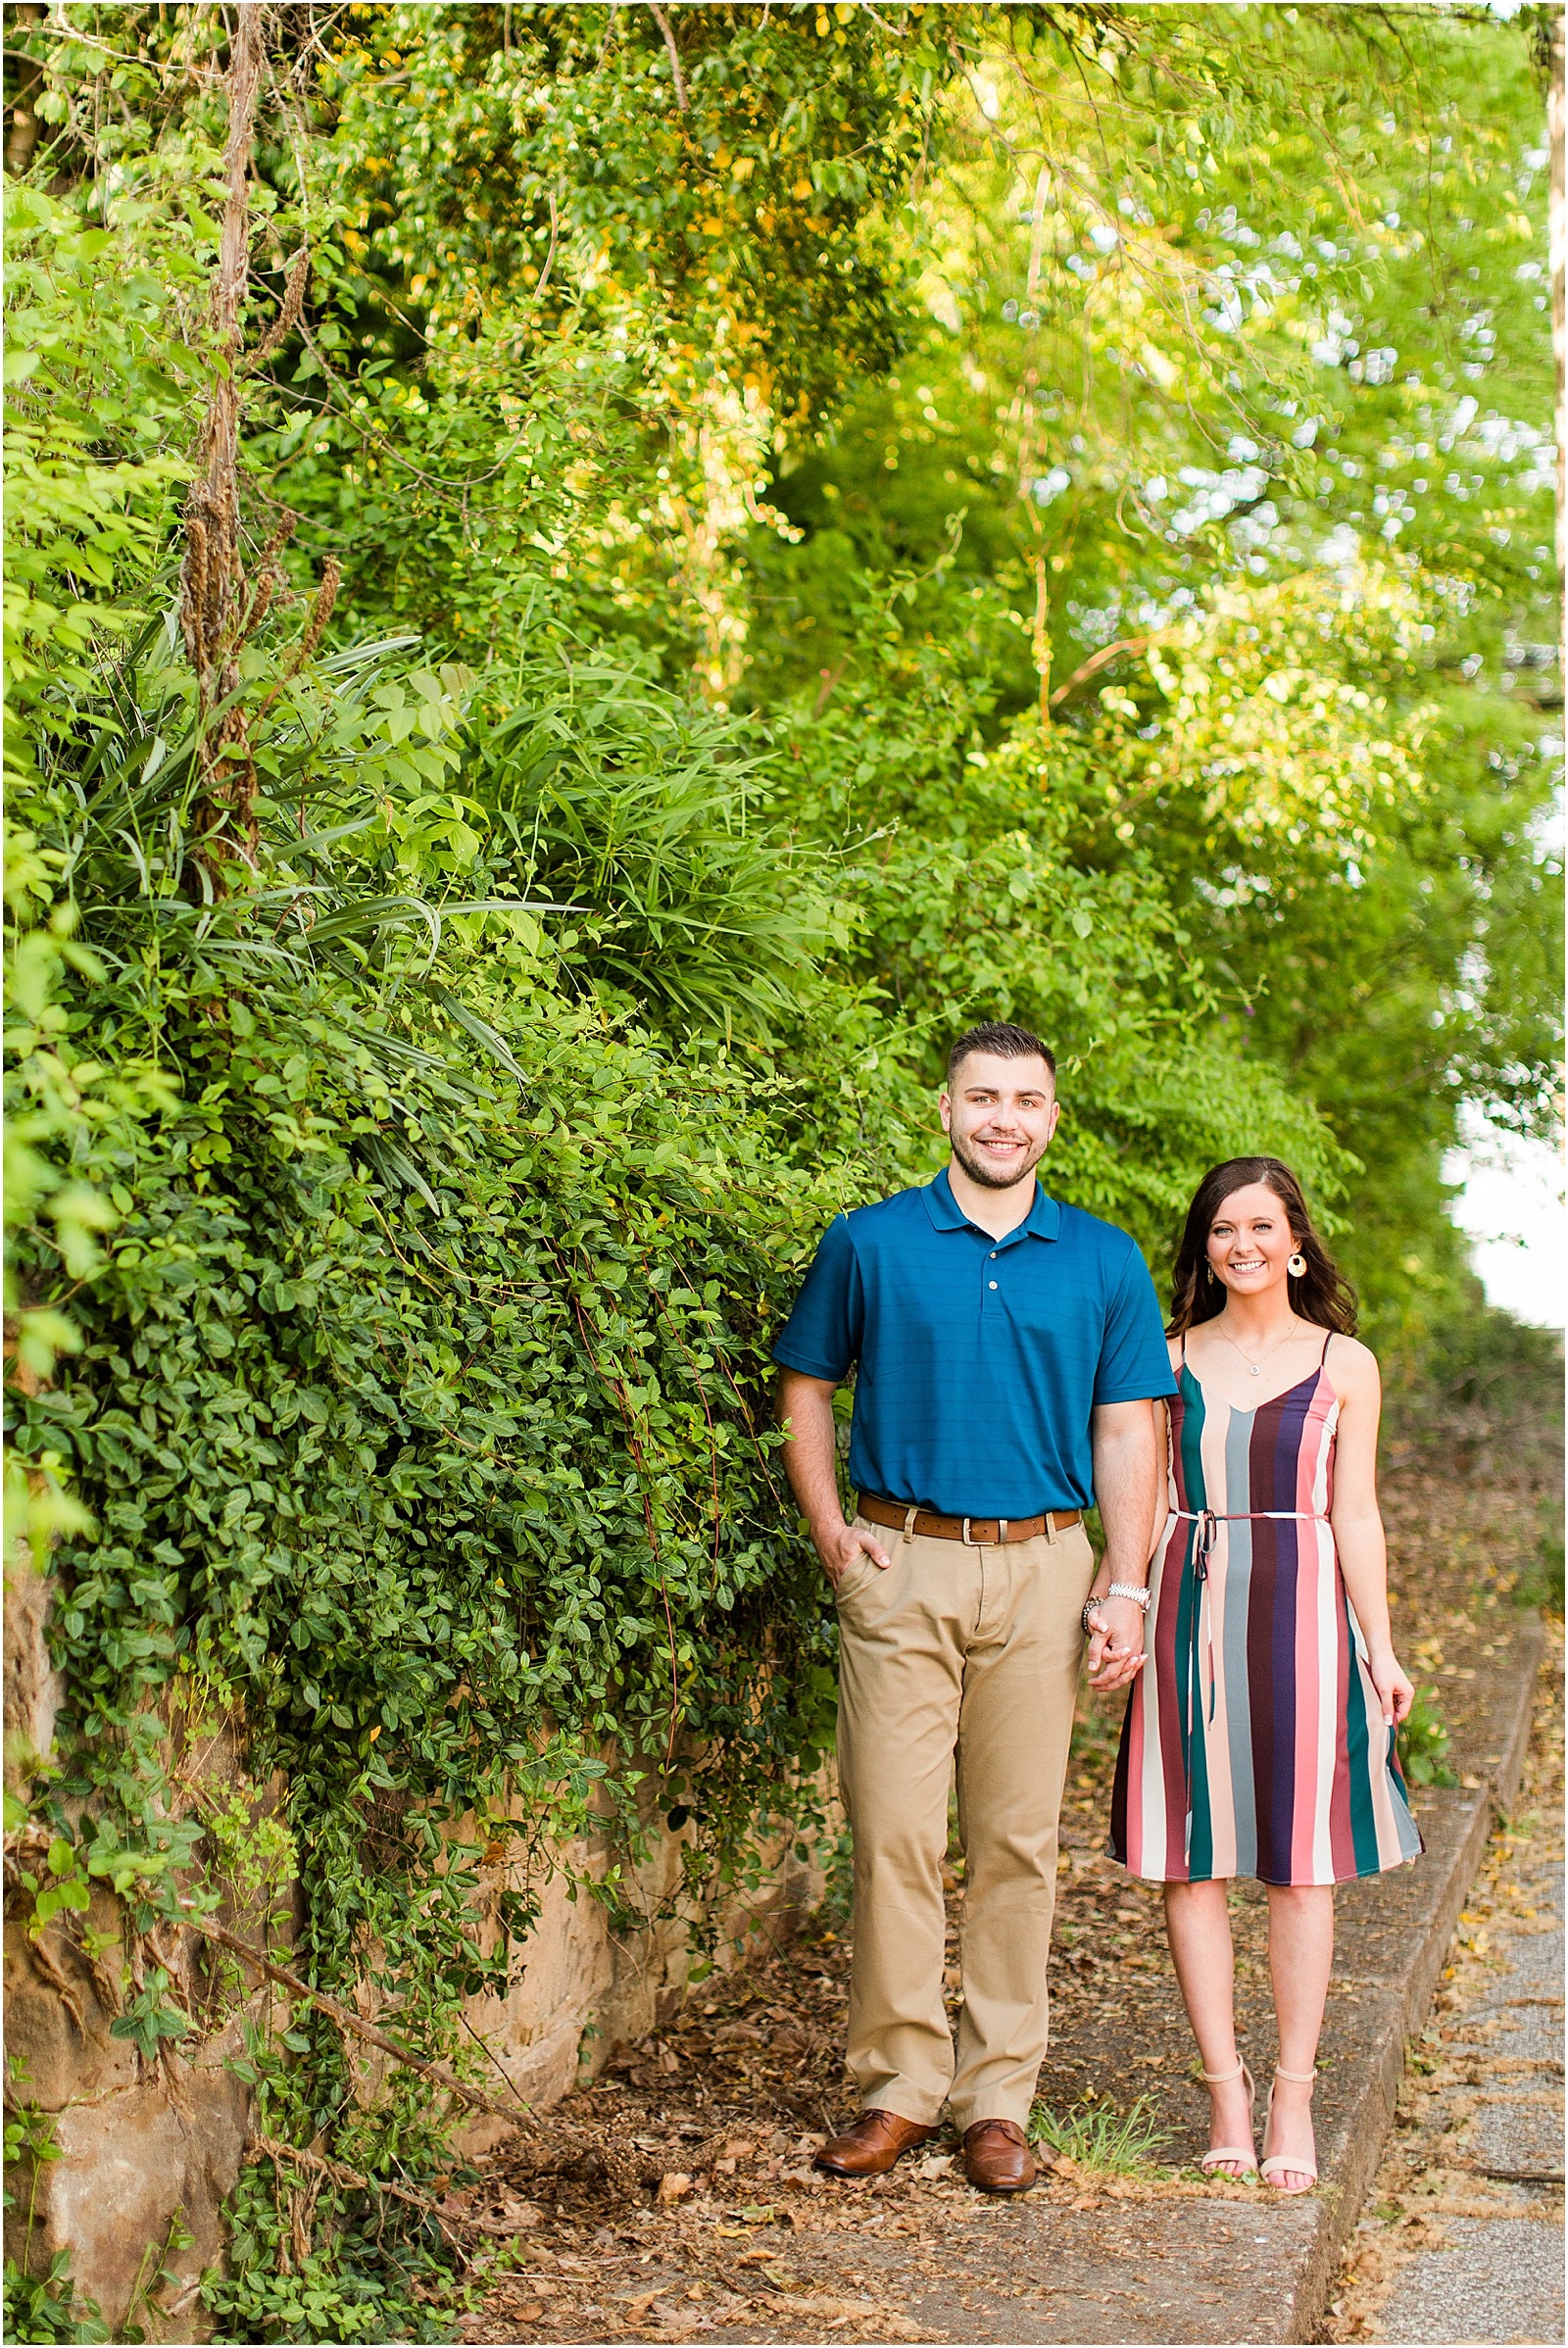 Downtown Newburgh Engagement Session | Matt and Blaire | Bret and Brandie Photography007.jpg